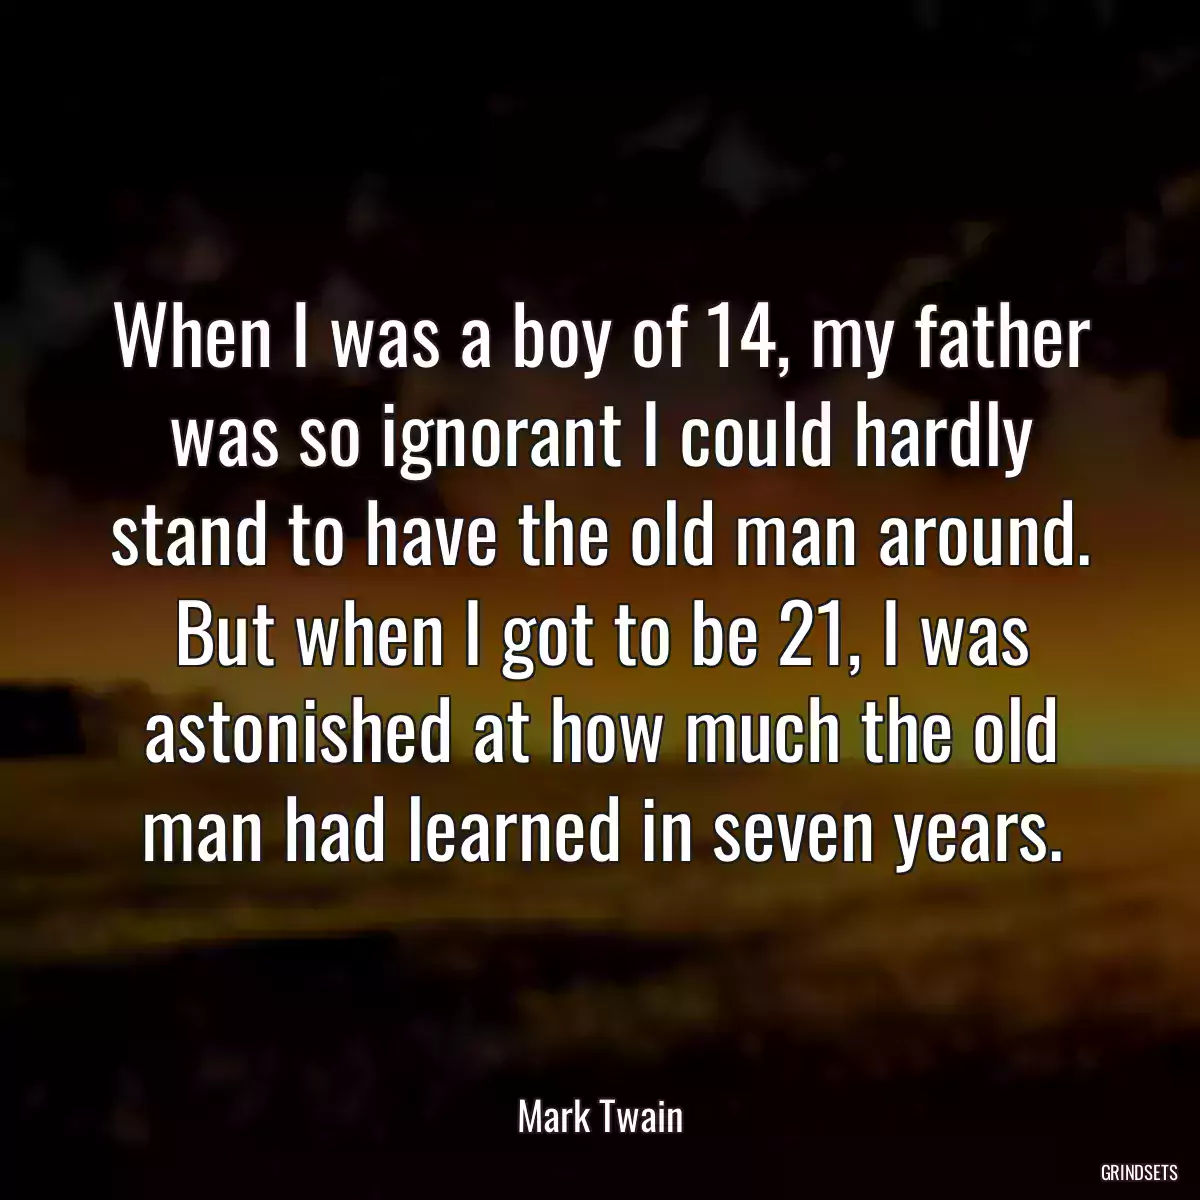 When I was a boy of 14, my father was so ignorant I could hardly stand to have the old man around. But when I got to be 21, I was astonished at how much the old man had learned in seven years.